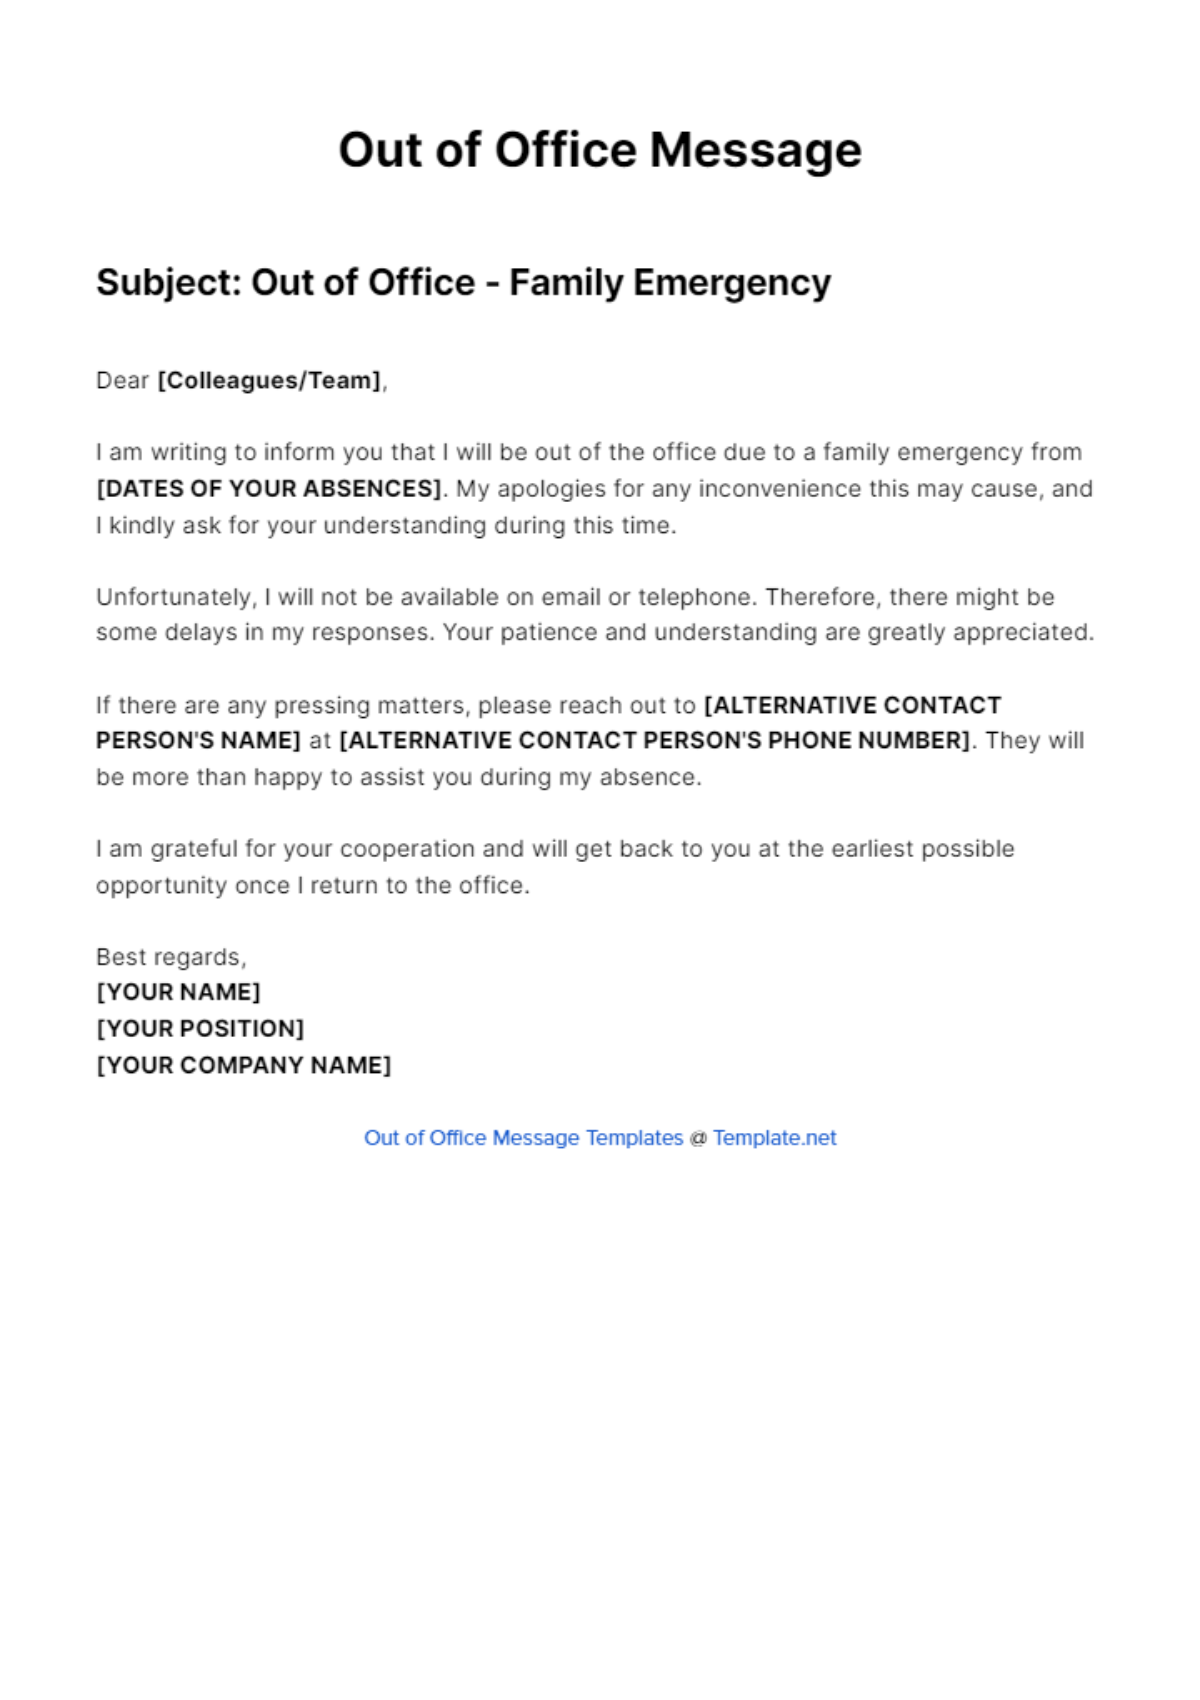 Out Of Office Message For Family Emergency Template